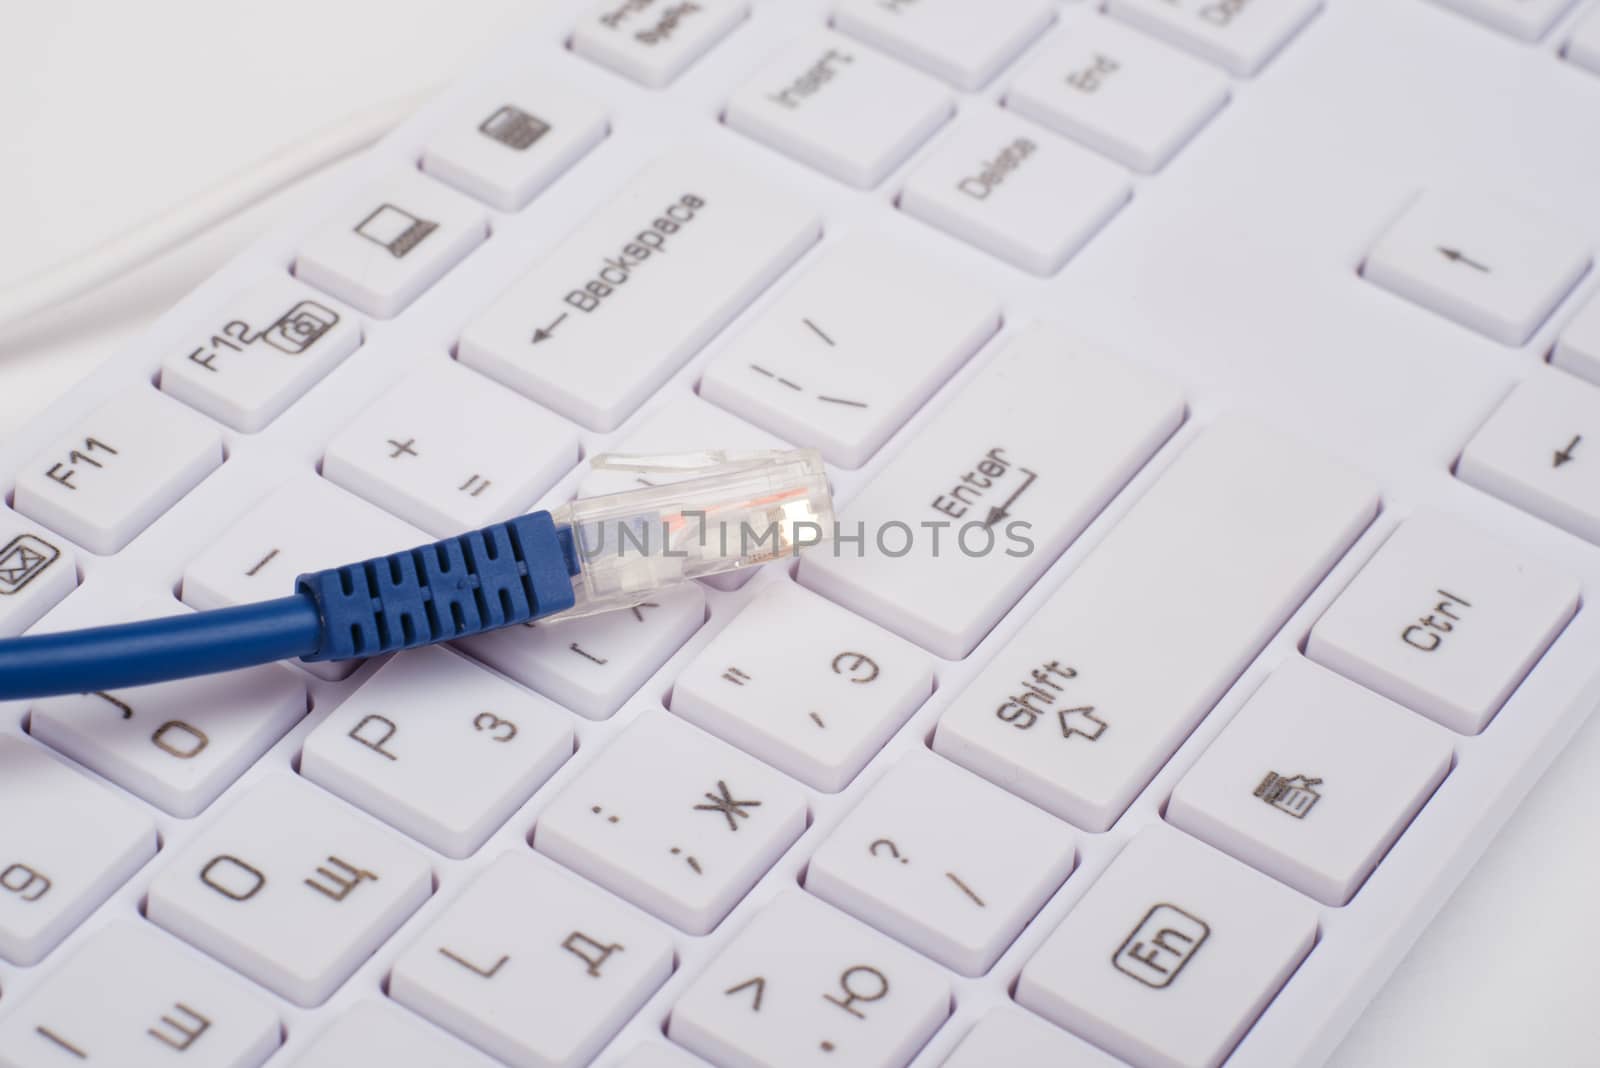 Blue computer cable with keyboard, close up view